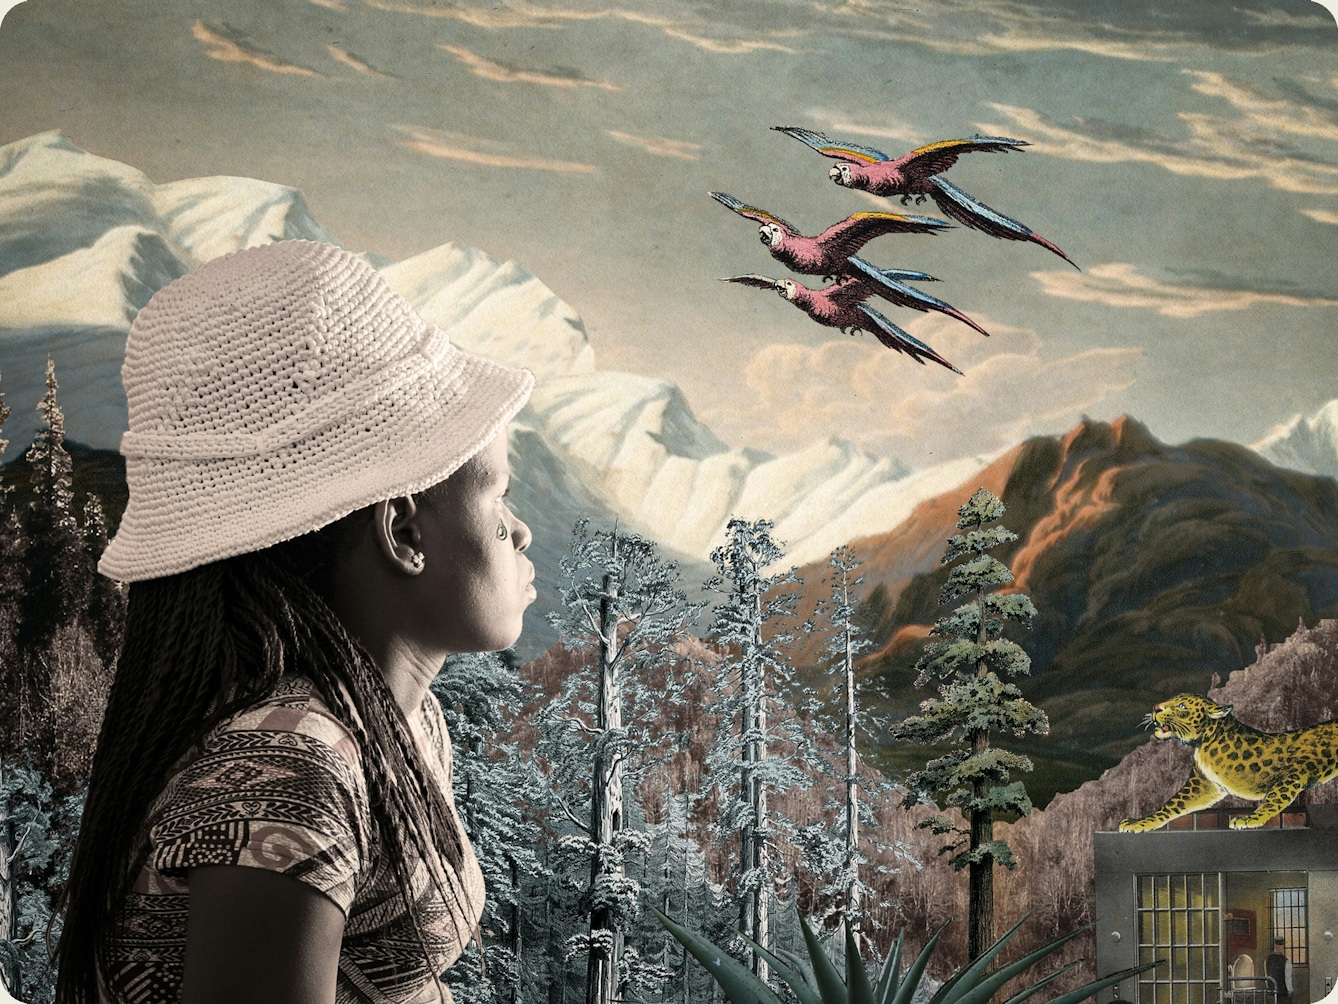 Artwork using collage. The collaged elements are made up of archive material which includes vintage and contemporary photographs, etchings, painted illustrations, lithographic prints and line drawings. This artwork depicts a scene with an urban and rural combined background, where high mountains and hills rise in the distance. In the middle distance are a series of tall trees and a jail like structure with bars. On top of the jail stands a large leopard looking up to the sky. In the foreground on the left side of the image is a woman wearing a pattered dress and knitted to crocheted hat. She is looking away into the distant hills with a tear rolling down her right cheek. In the cloud scattered sky above are 3 parrots in flight.